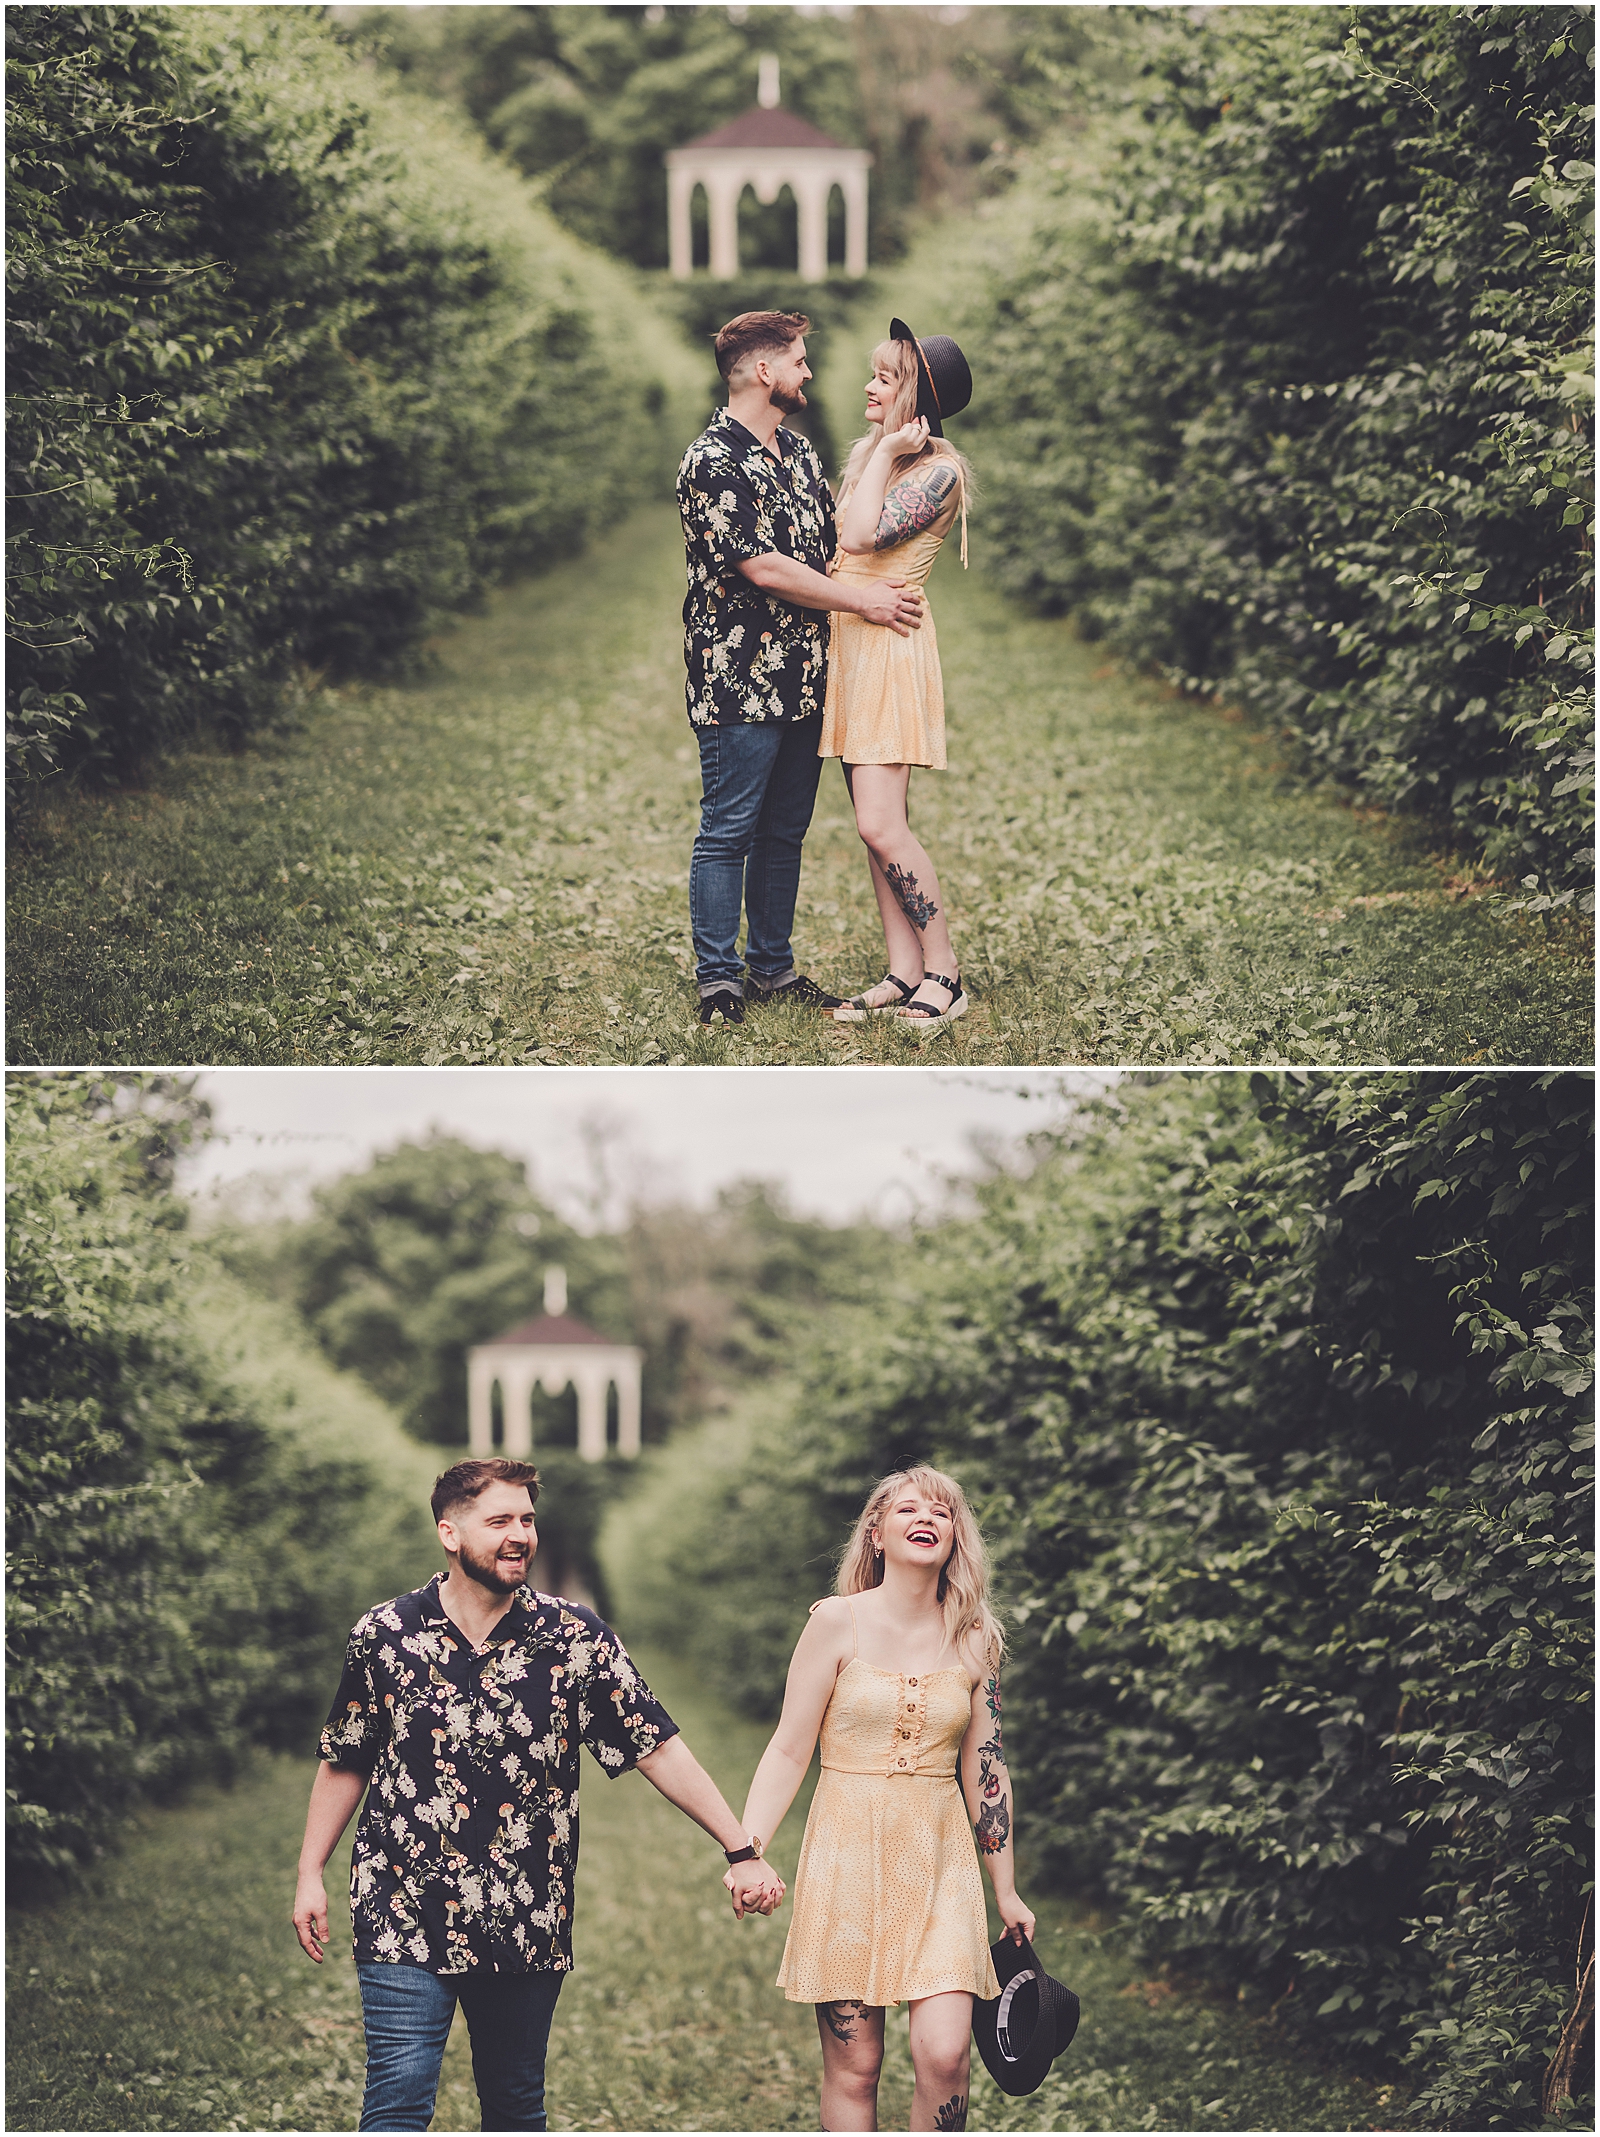 Hannah and Collin's summer engagement photos at Allerton Park in Monticello, IL with Chicagoland wedding photographer Kara Evans Photographer.